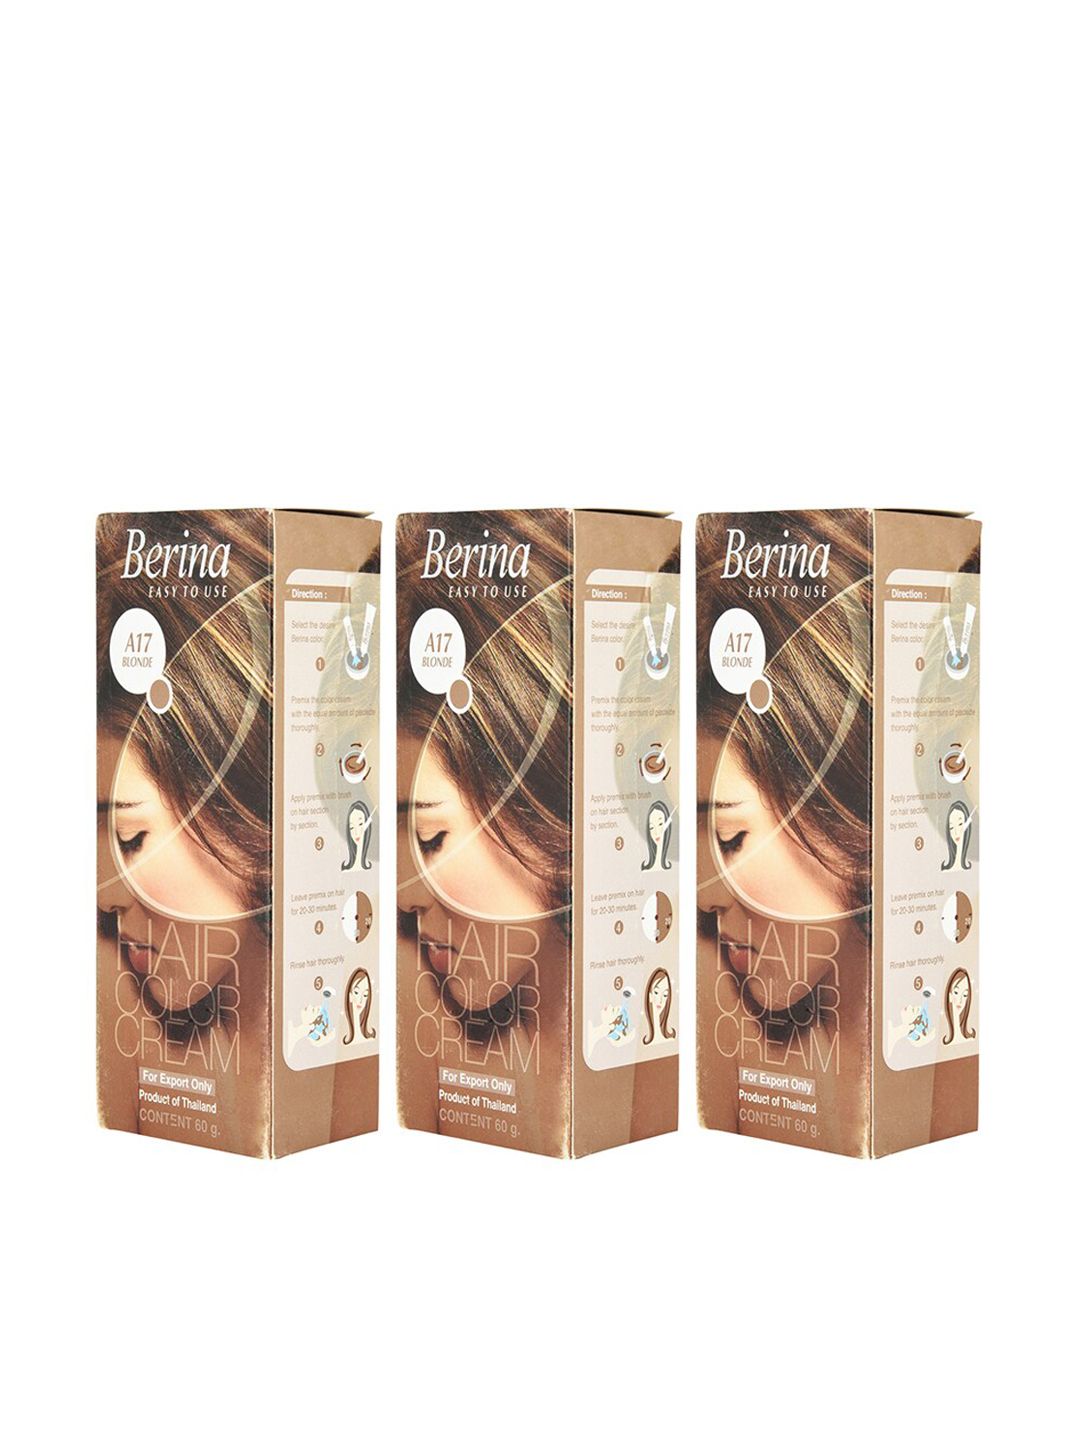 Berina Pack of 3 Hair Color Cream A17 Blonde Price in India